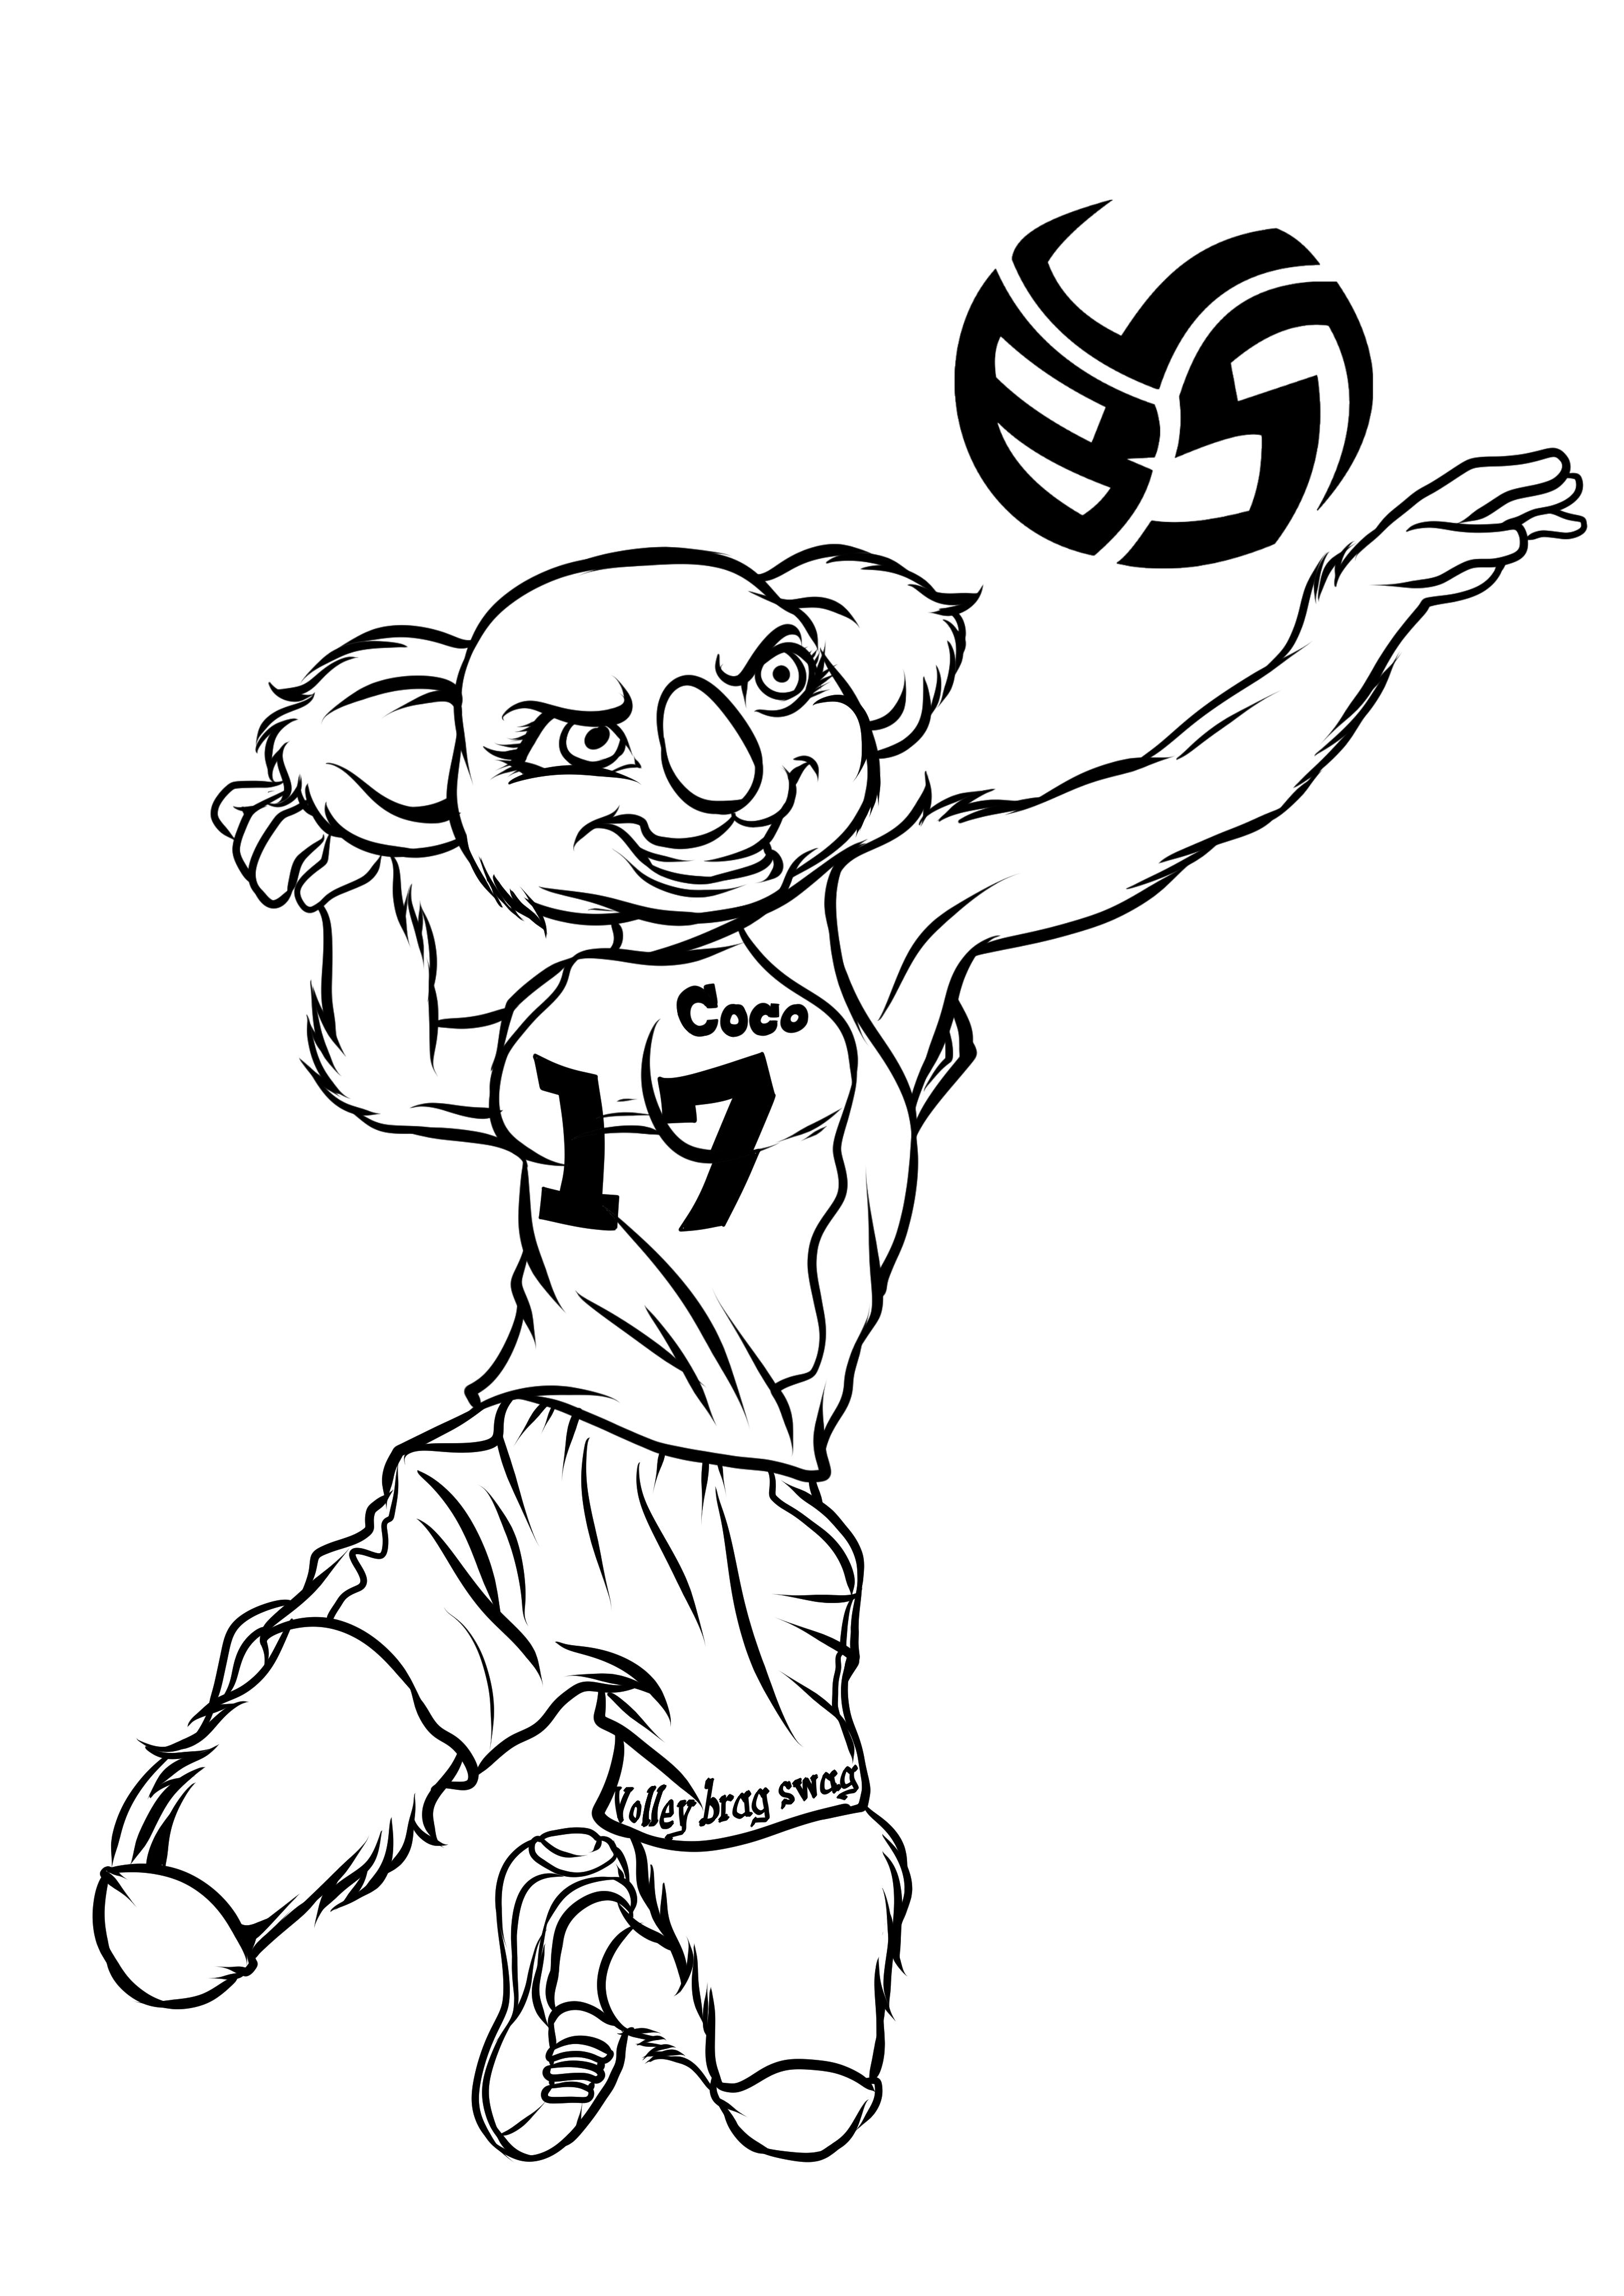 Volleybragswag Coco the Koala coloring pages